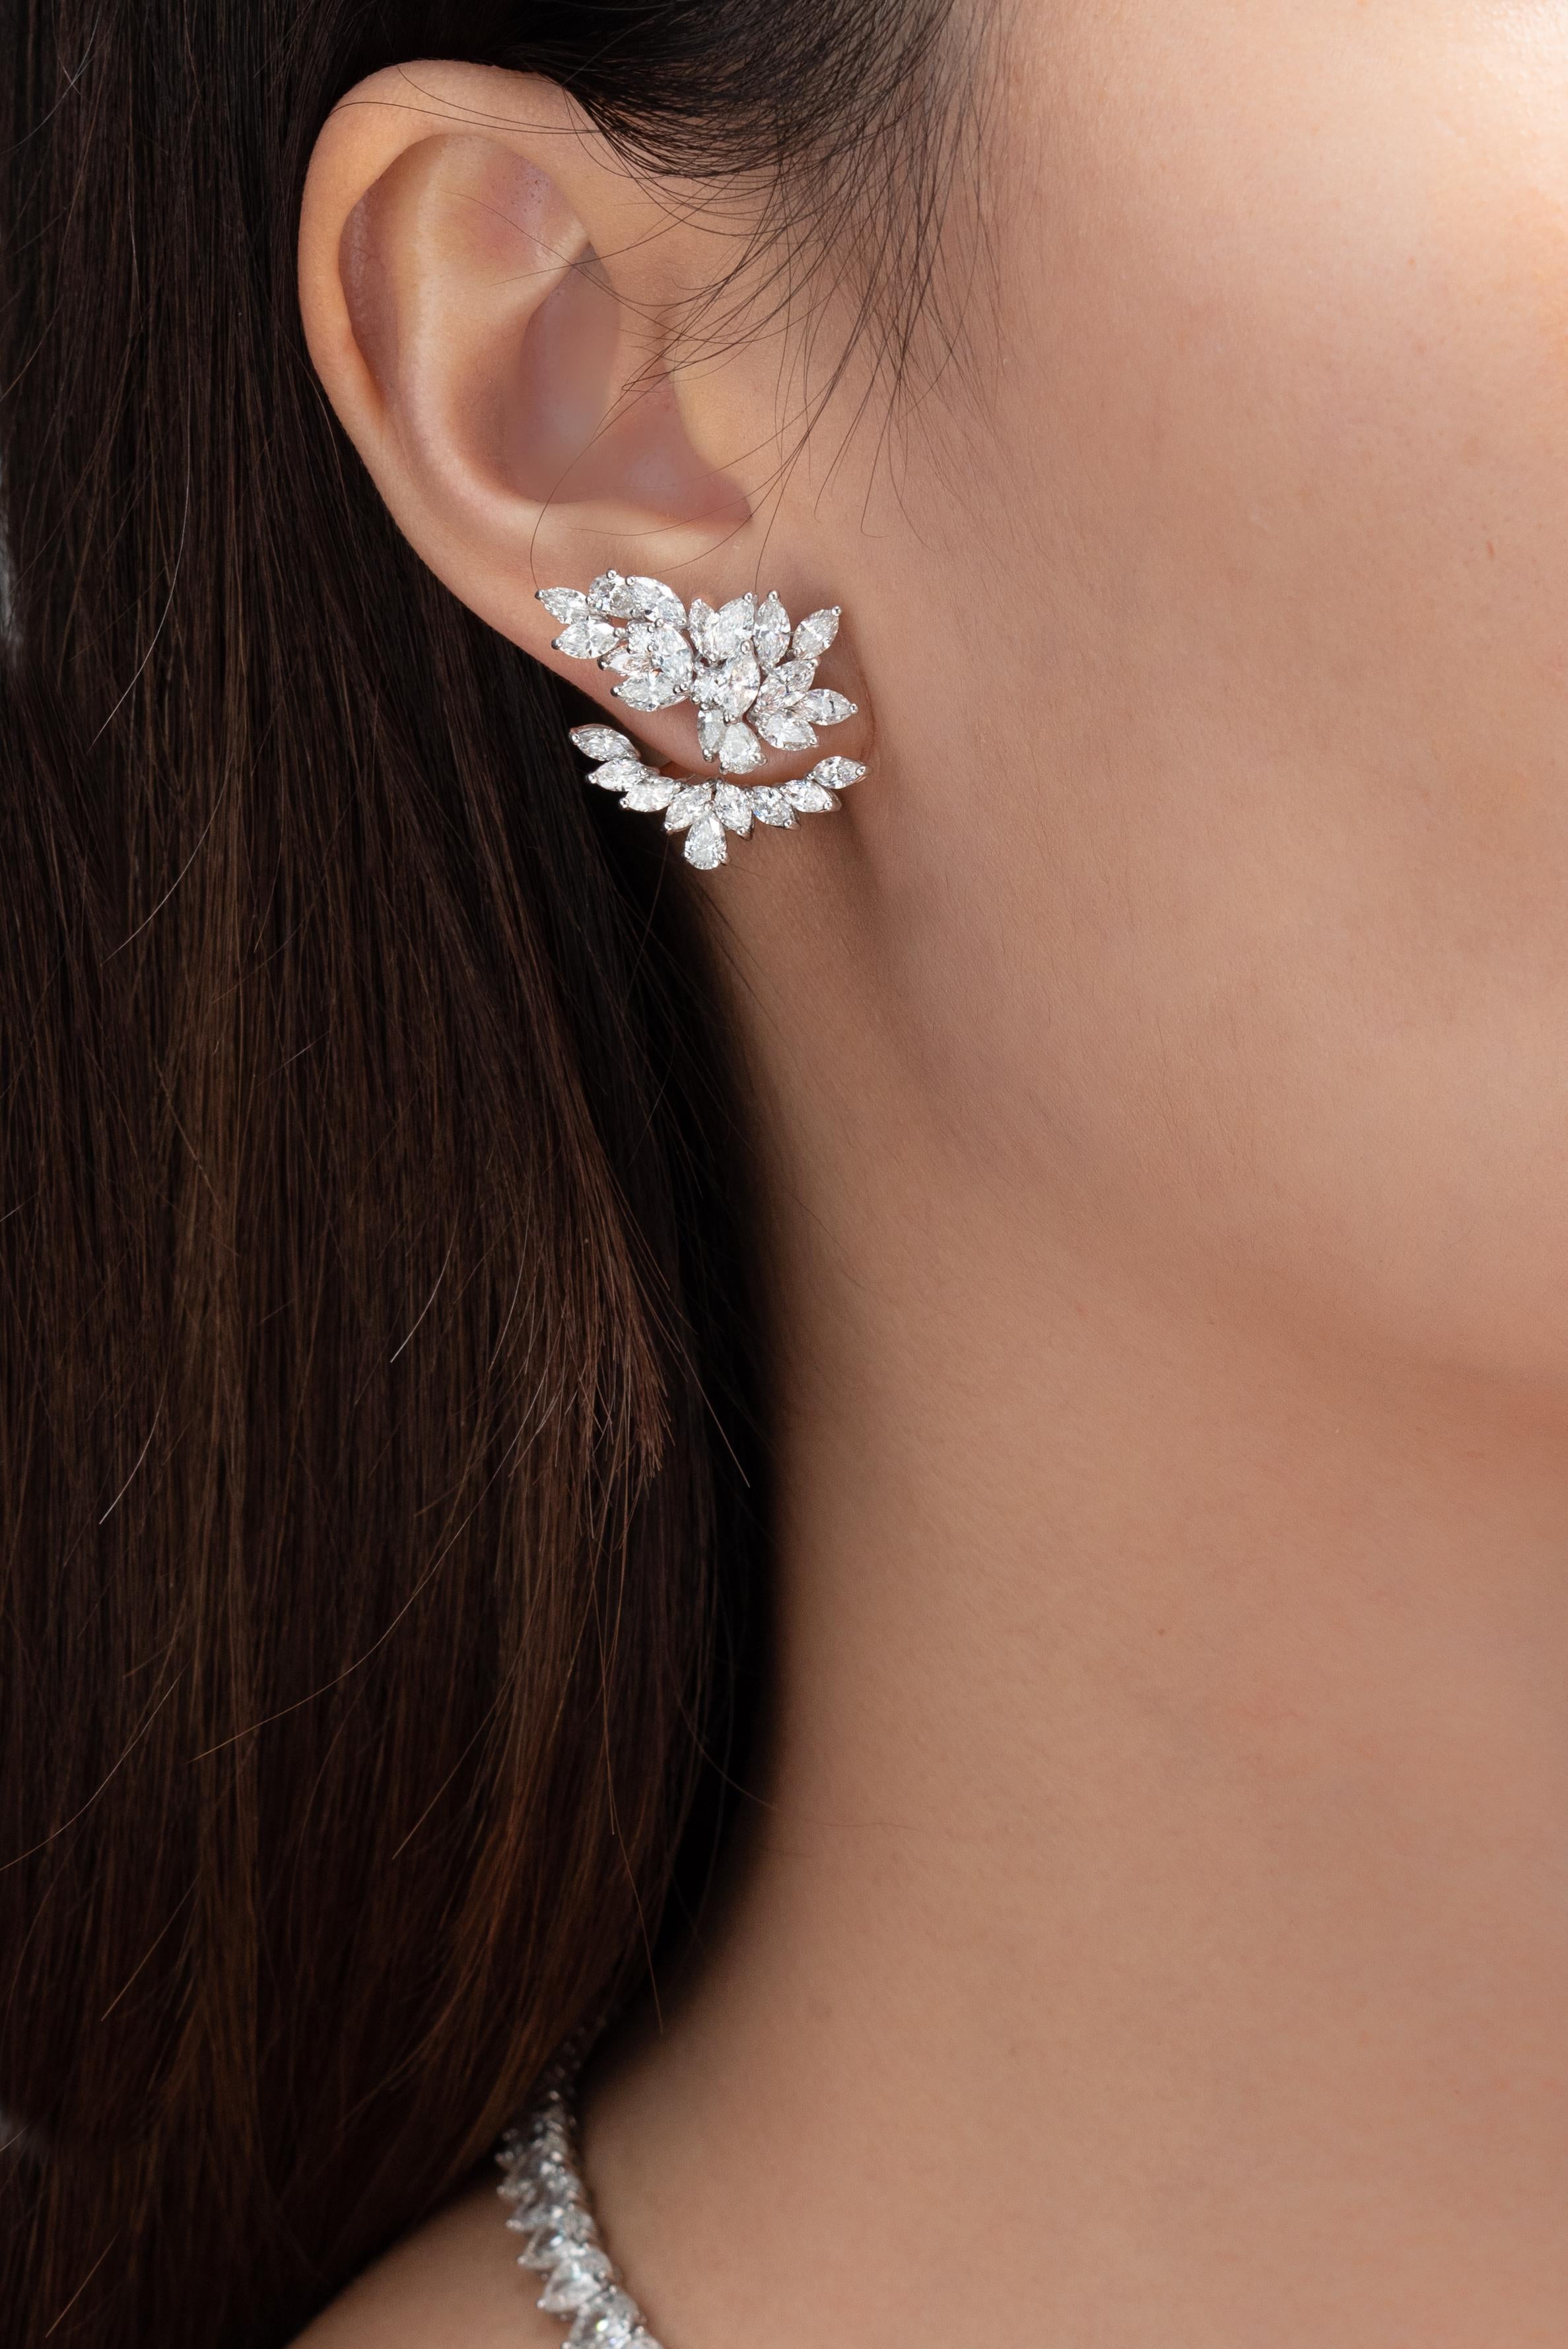 These unique diamond earrings from Vihari Fine Jewels offer clients the added advantage of versatility as they can be worn 3 different ways: (1) as shown in the image with the earring and the ear jacket, (2) just simply the earring without the ear